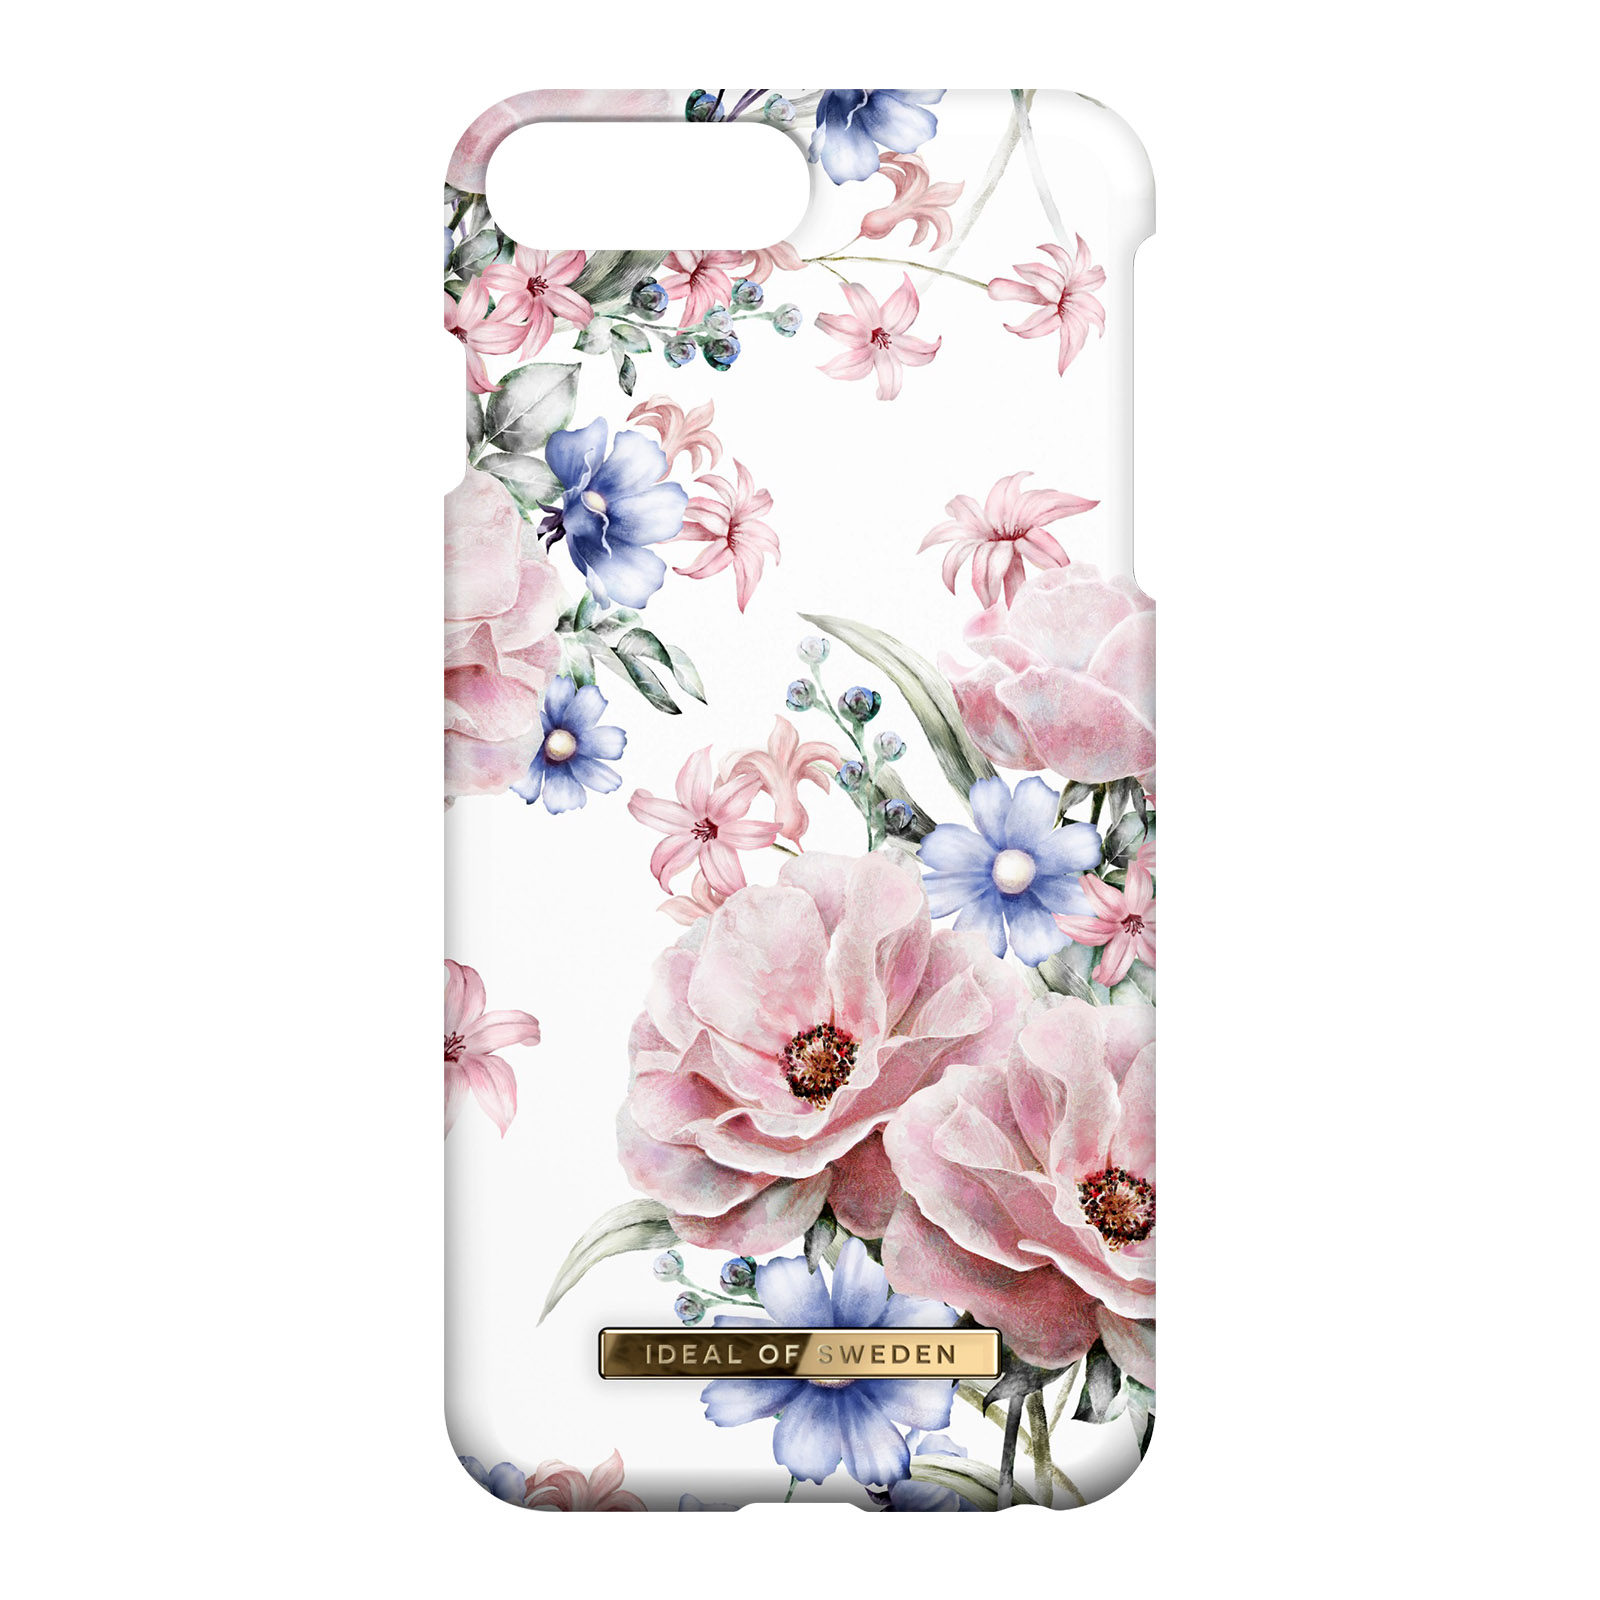 IDEAL OF SWEDEN iPhone Rosa Apple, Series, Romance Backcover, 8 Plus, Floral